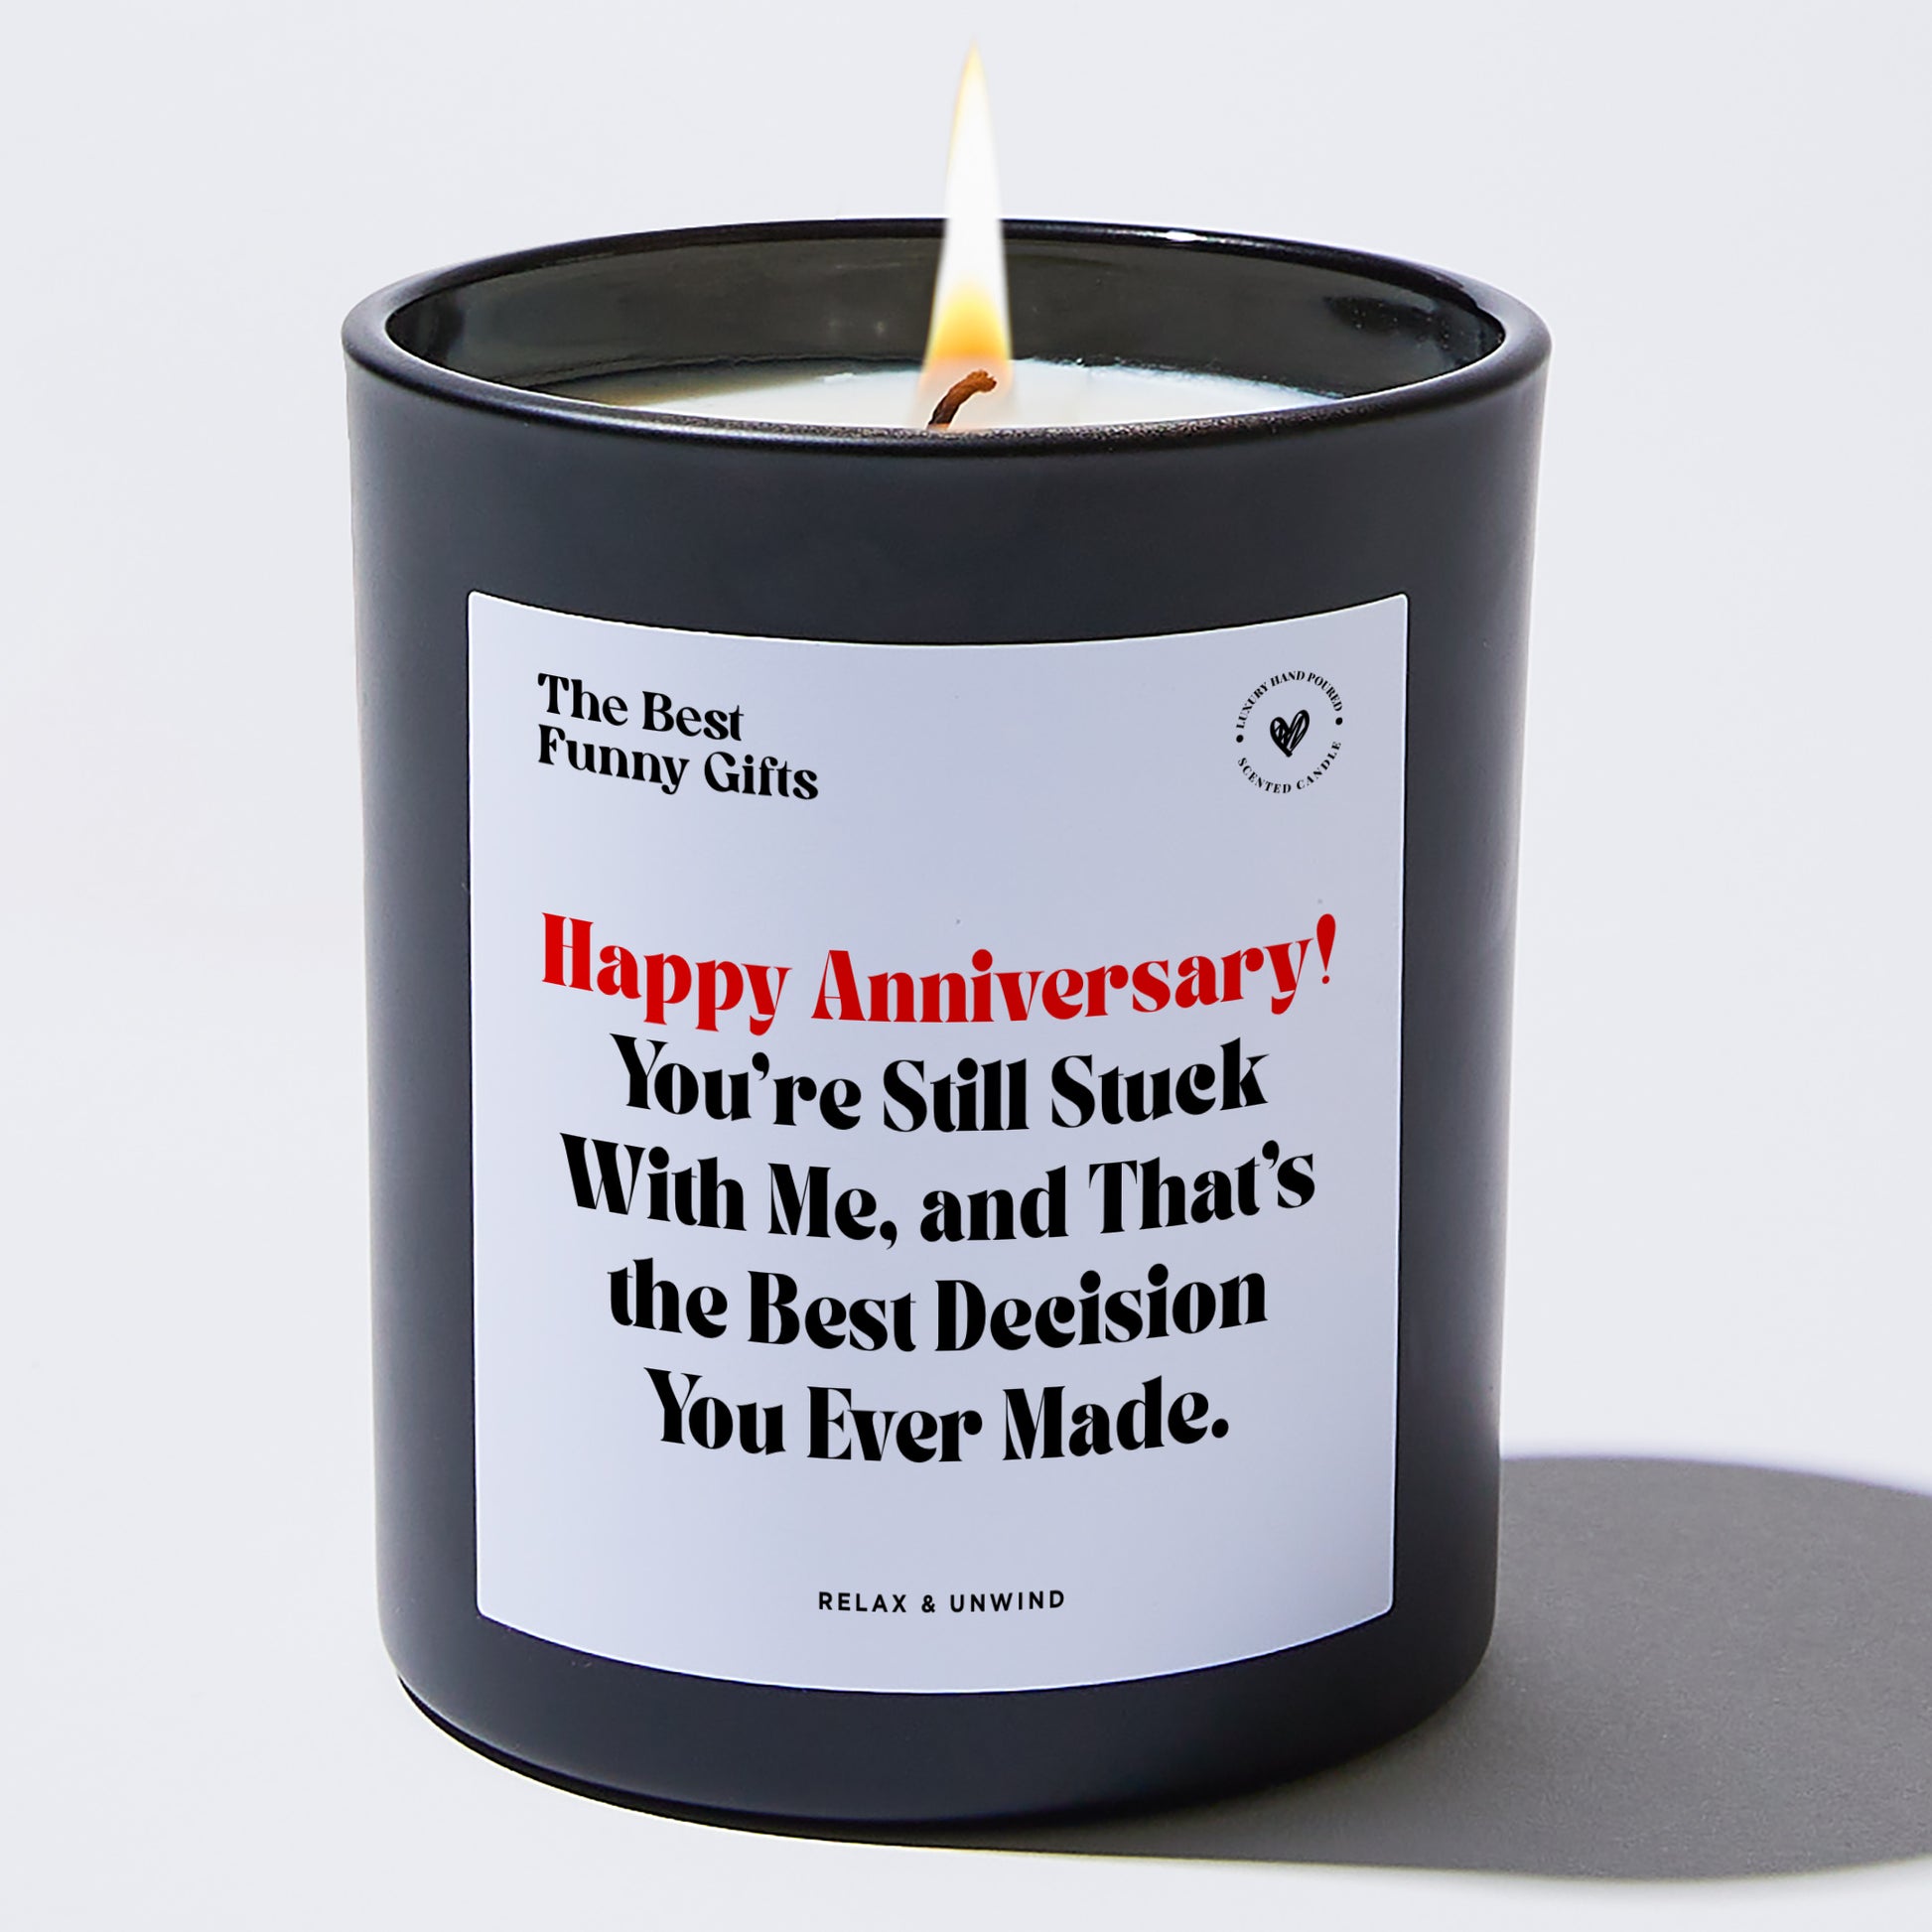 Anniversary Happy Anniversary! You're Still Stuck With Me, and That's the Best Decision You Ever Made. - The Best Funny Gifts